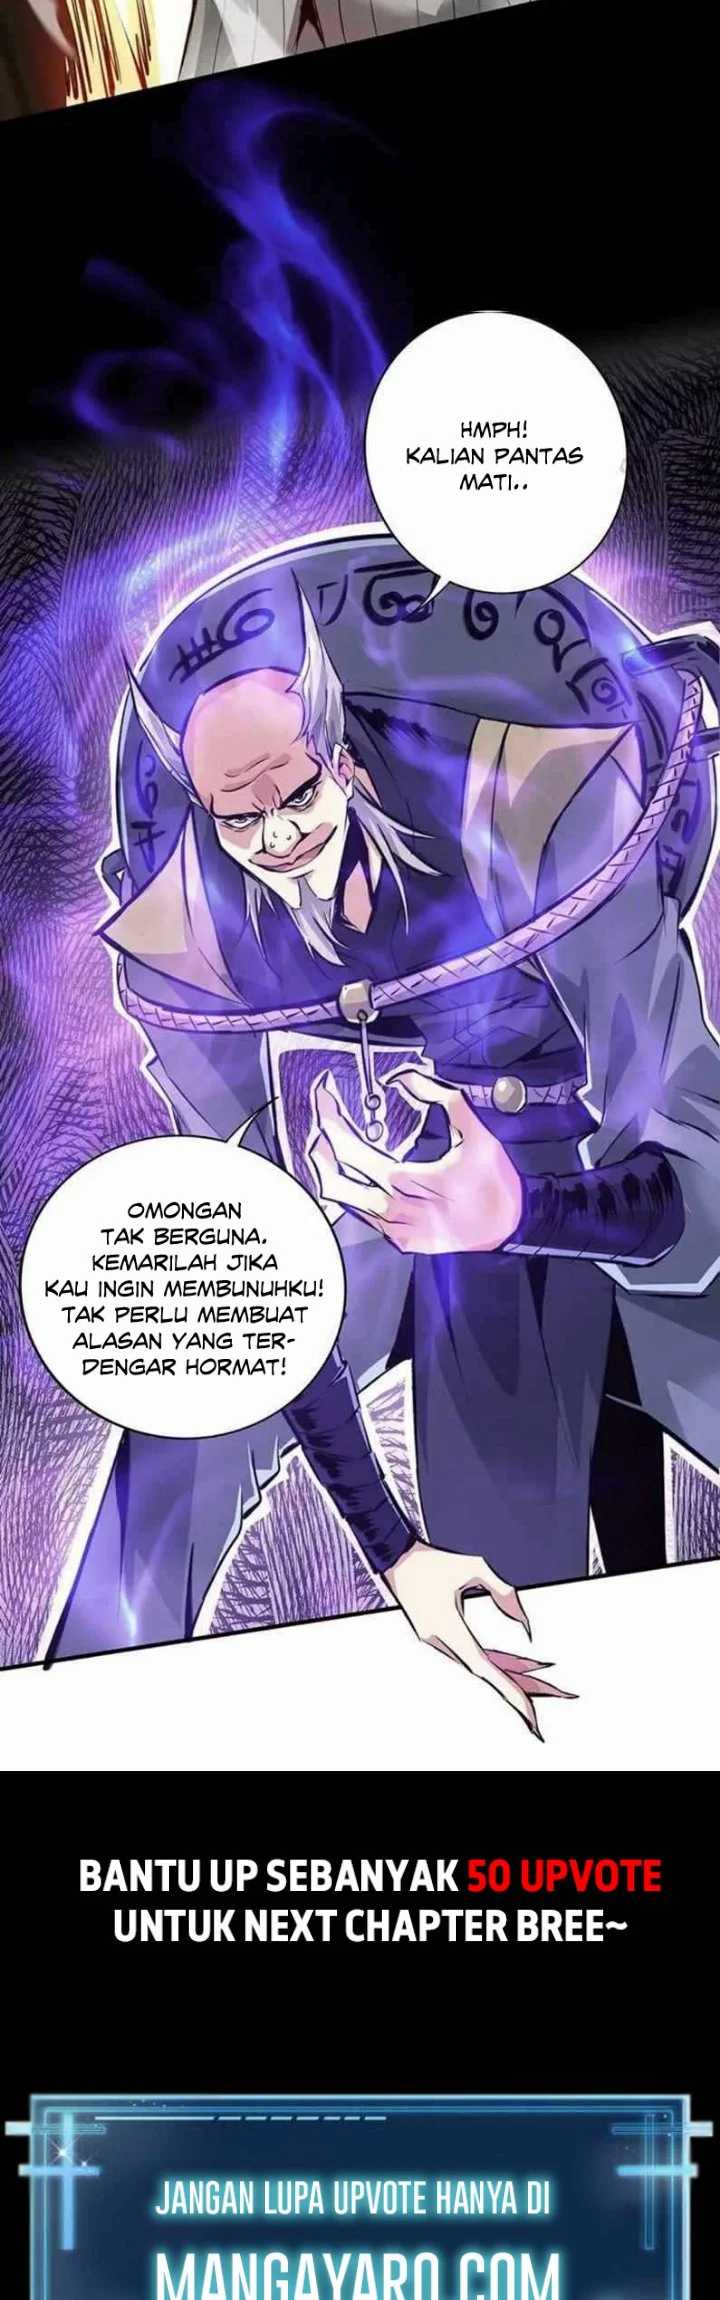 The First Son-in-law Vanguard Of All Time Chapter 209